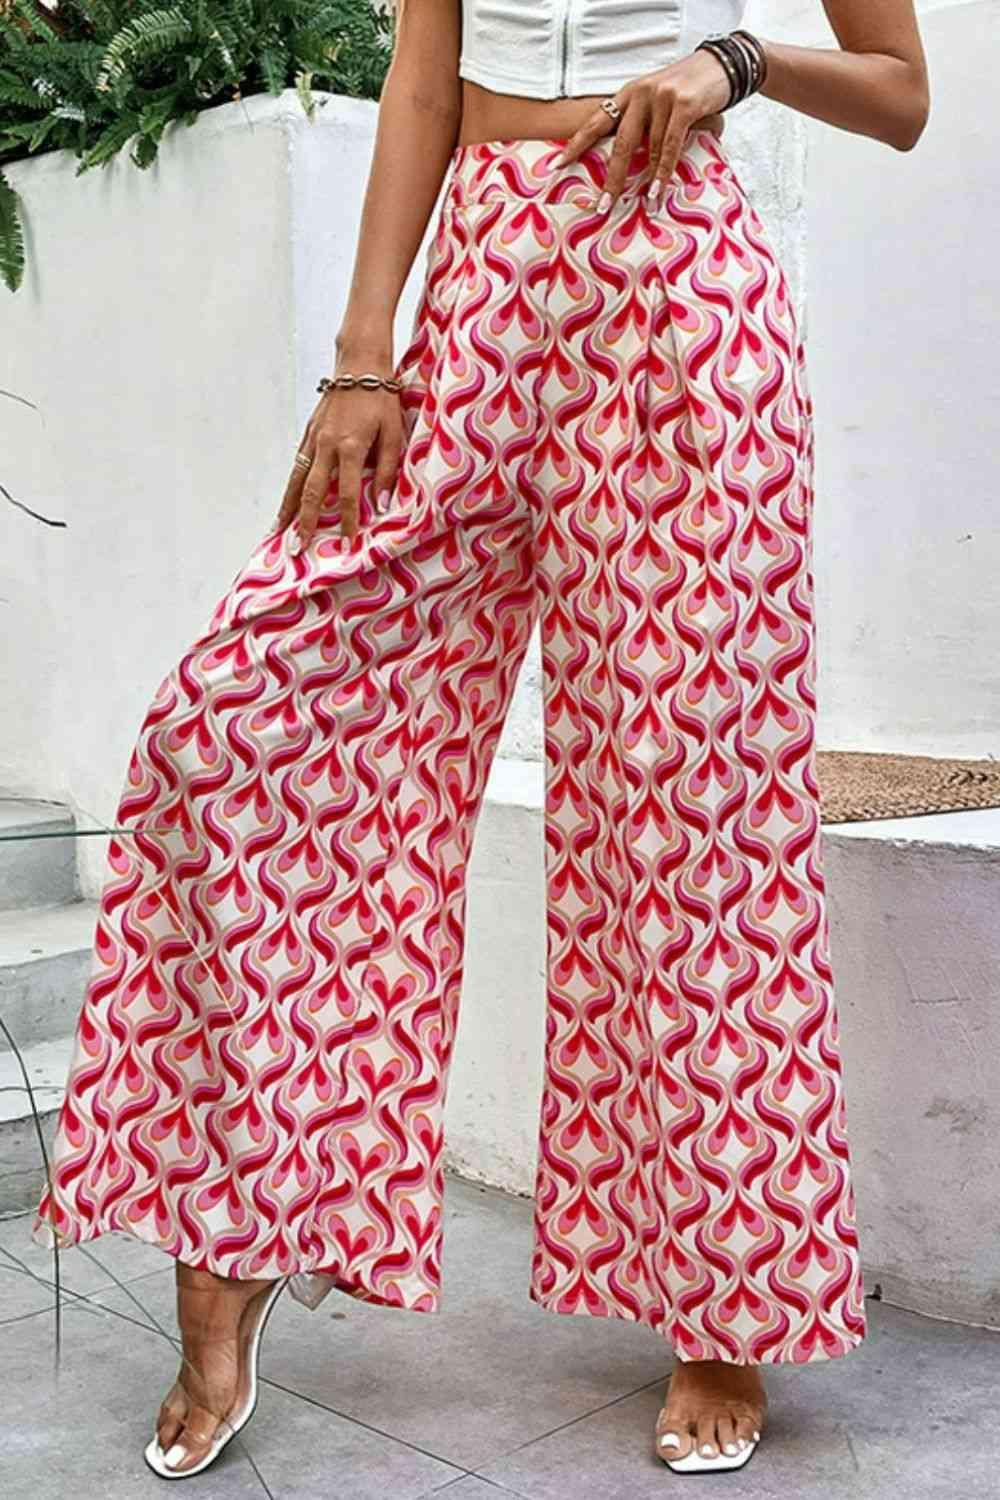 Red Printed High-Waist Culottes Your New Closet Must-Have Ladies!